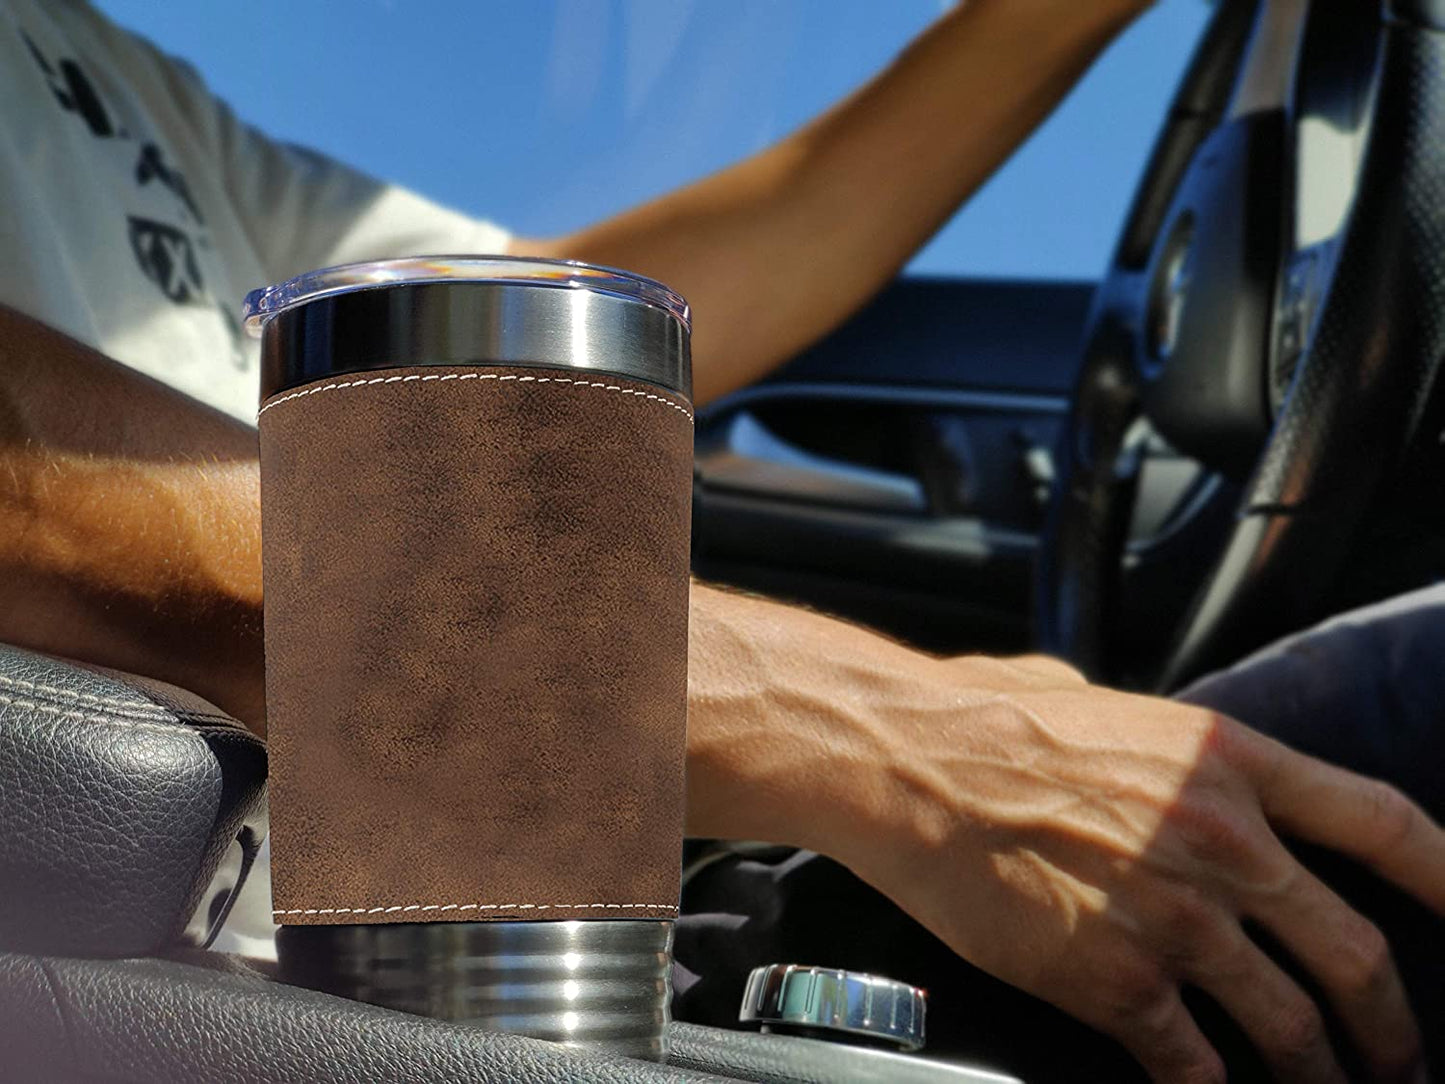 20oz Faux Leather Tumbler Mug, Old Farm Tractor, Personalized Engraving Included - LaserGram Custom Engraved Gifts